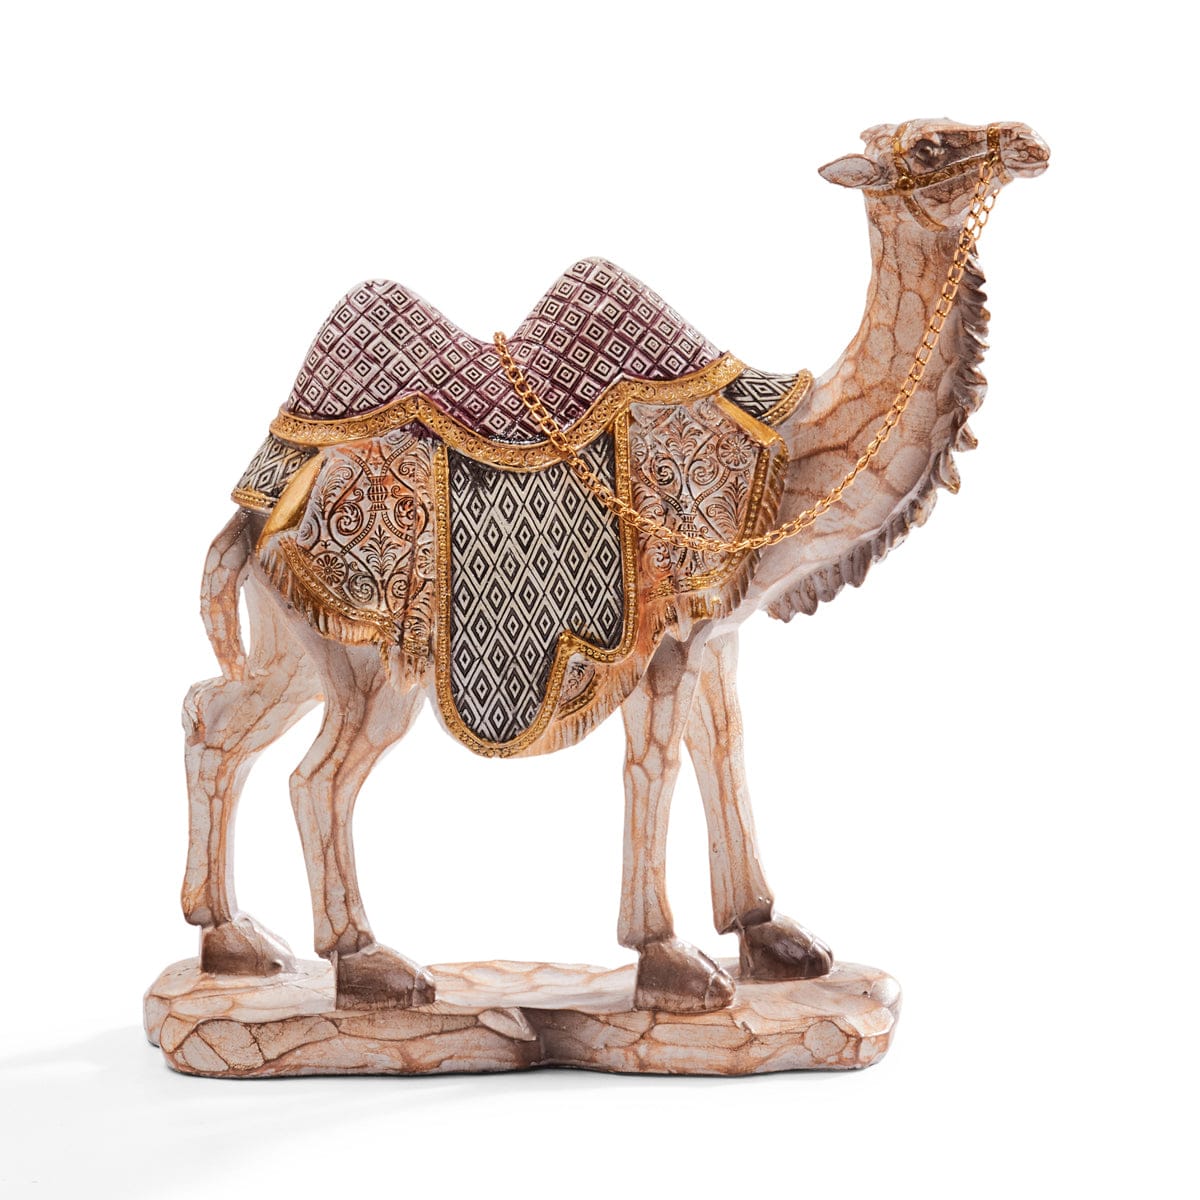 Red Butler Showpieces Dormedary Camel Big AADC00R10Y19A1 ADC10A1 Camel Showpiece – Elegance Inspired by Middle Eastern Artistry | Animal figurine showpieces Redbutler